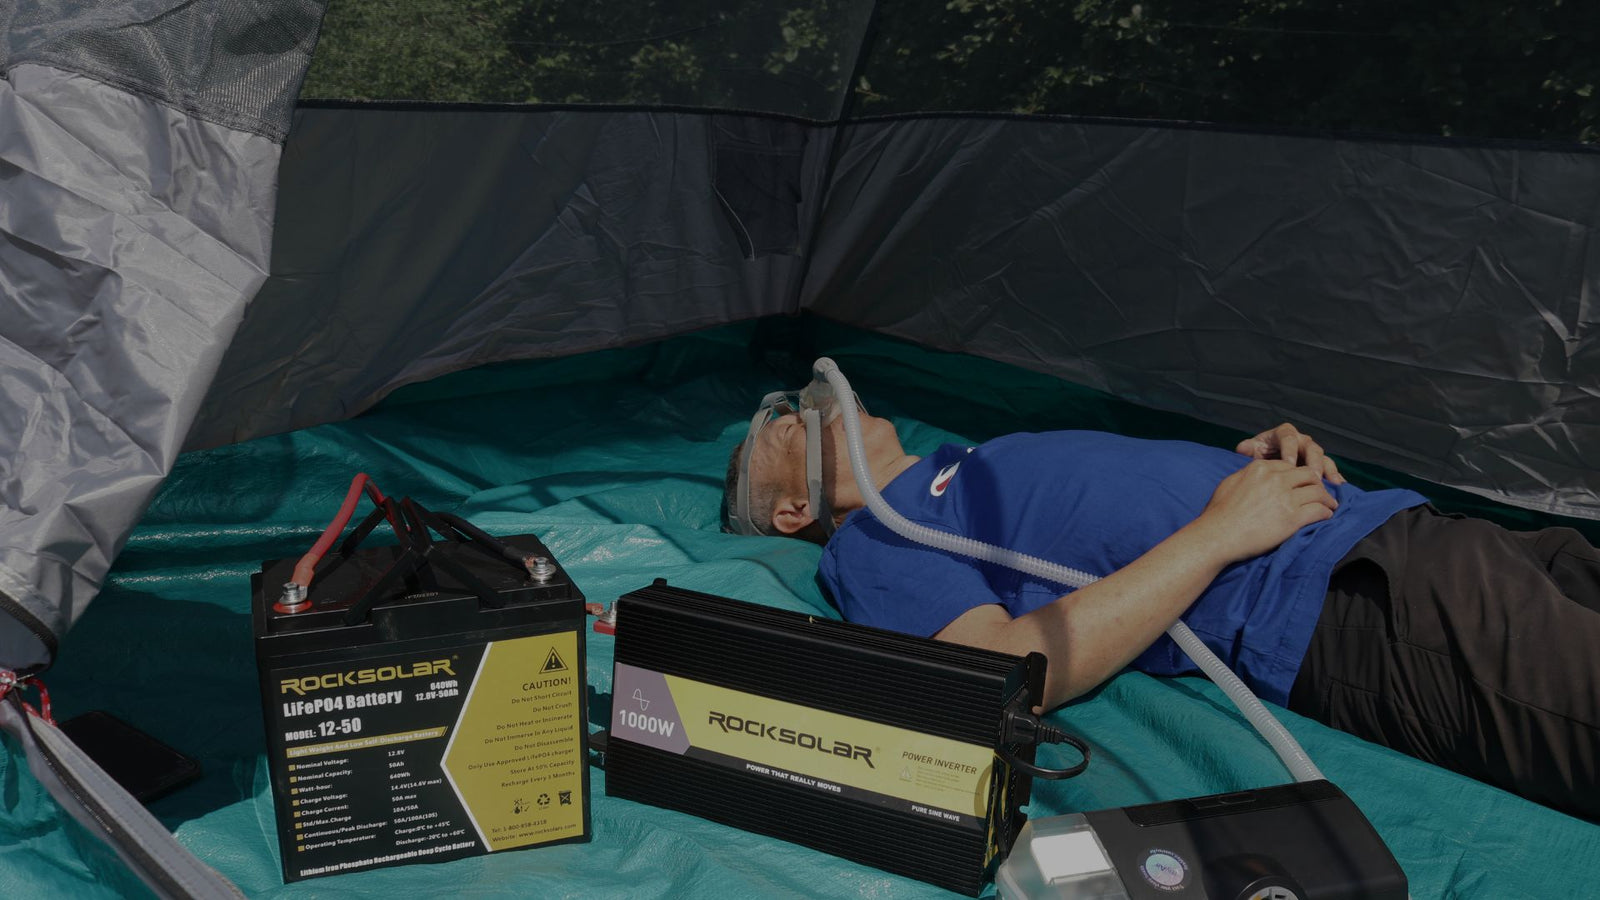 Power Up Your CPAP on Your Next Camping Trip with ROCKSOLAR's LIFEPO4 Batteries